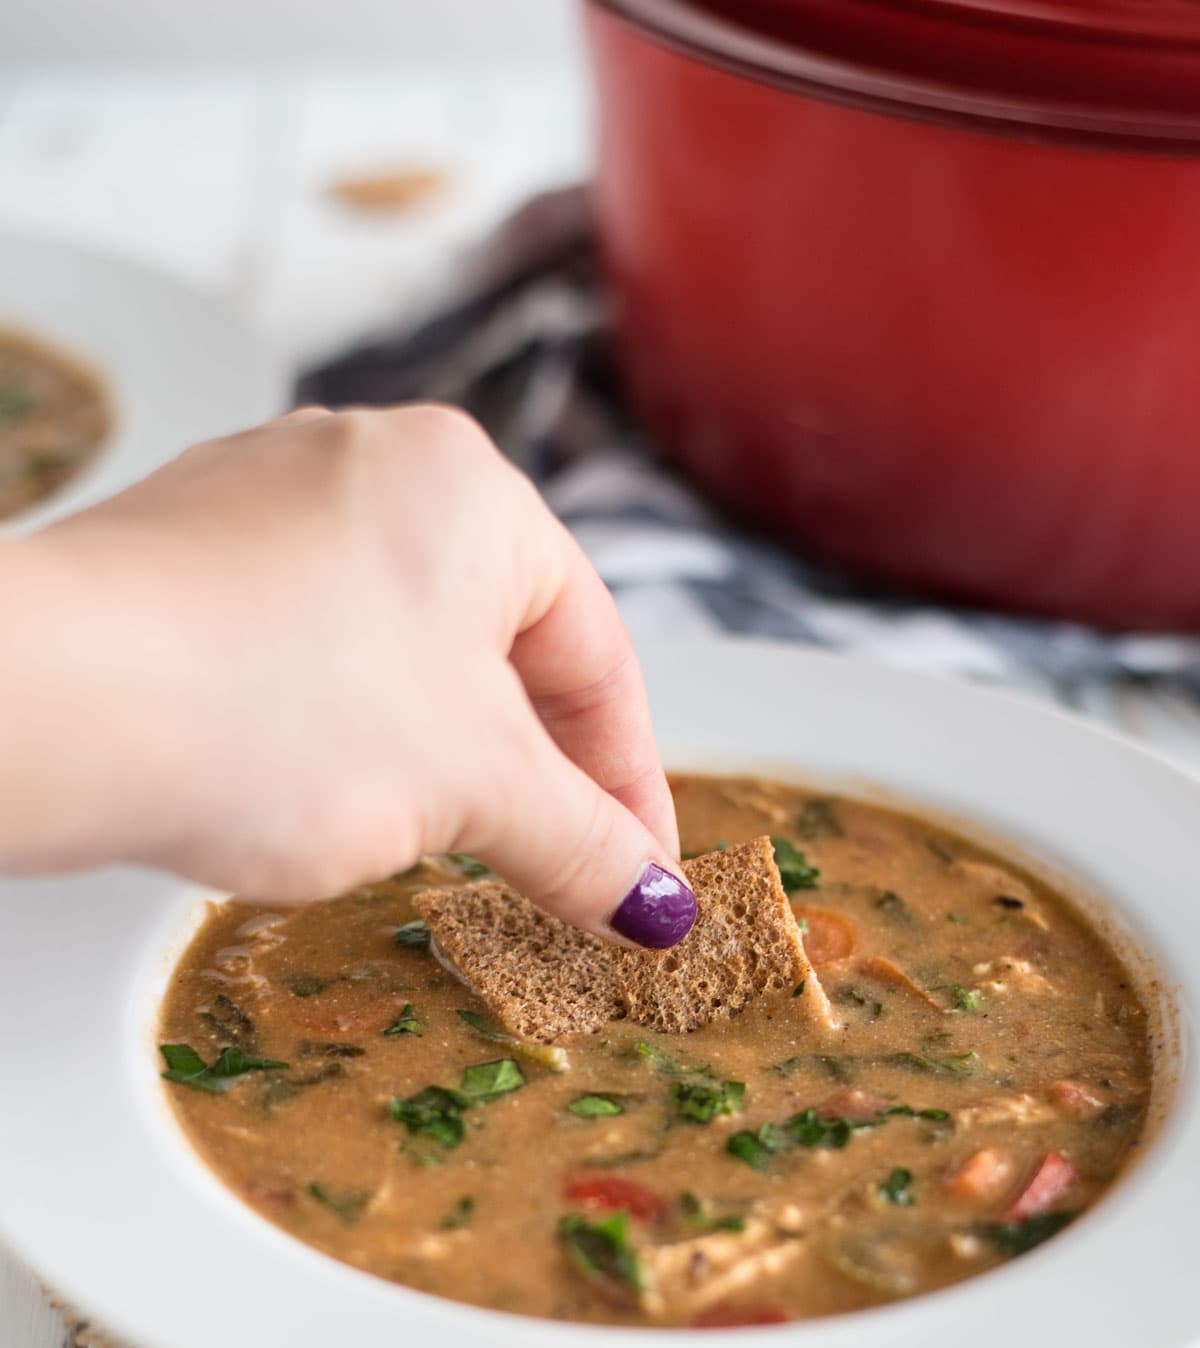 Hand dipping cracker into soup